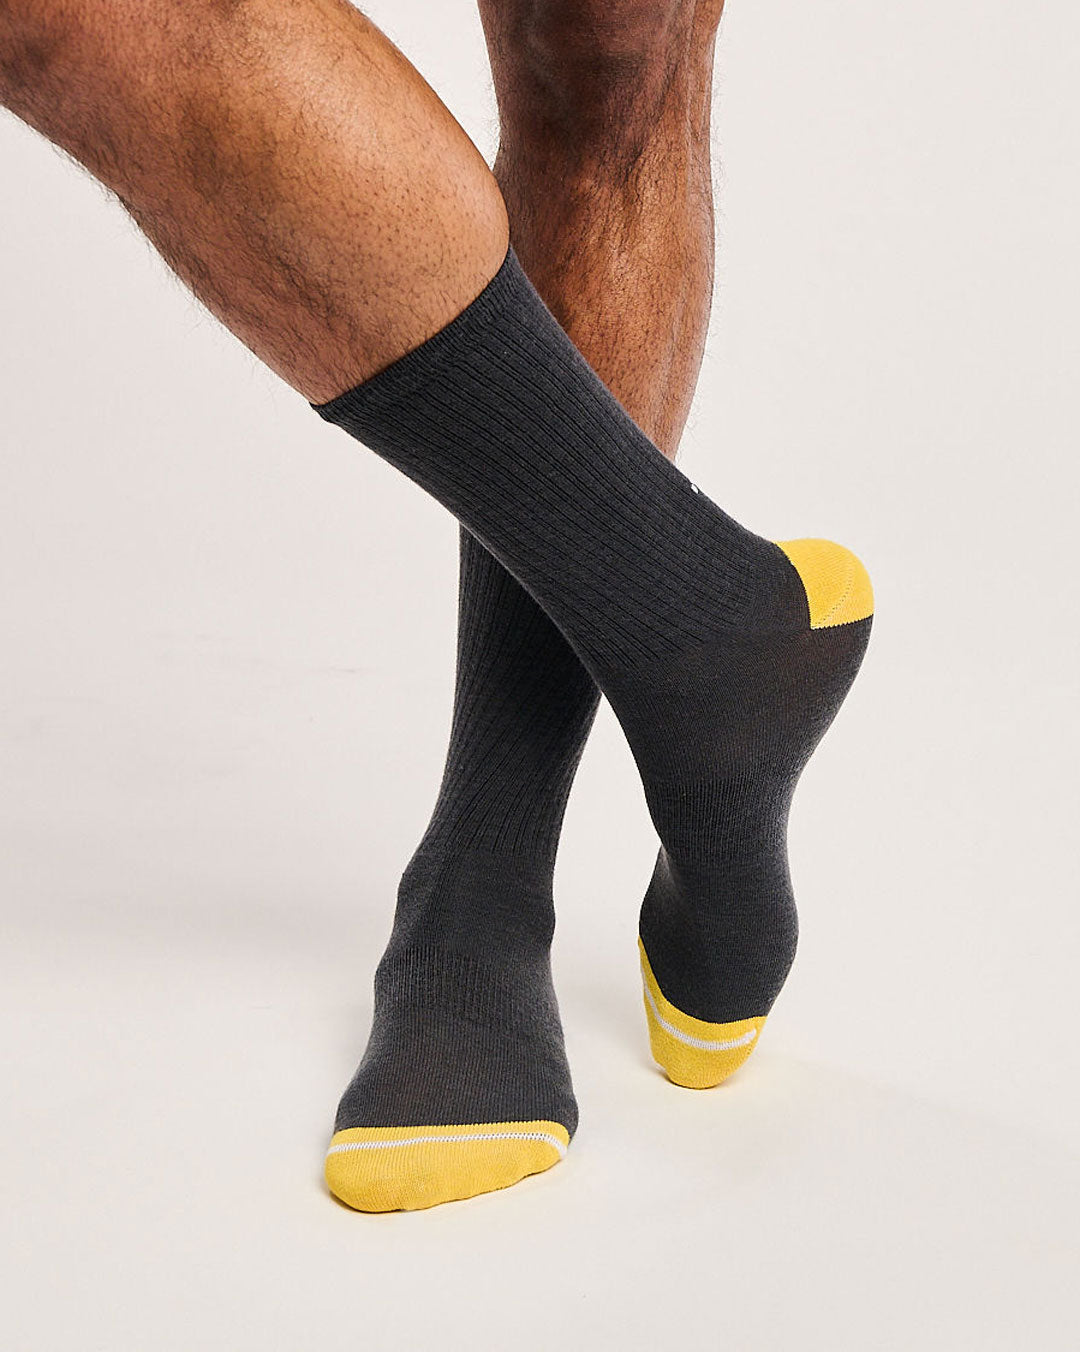 Arch support socks. Socks with seamless toes. Welly boot socks